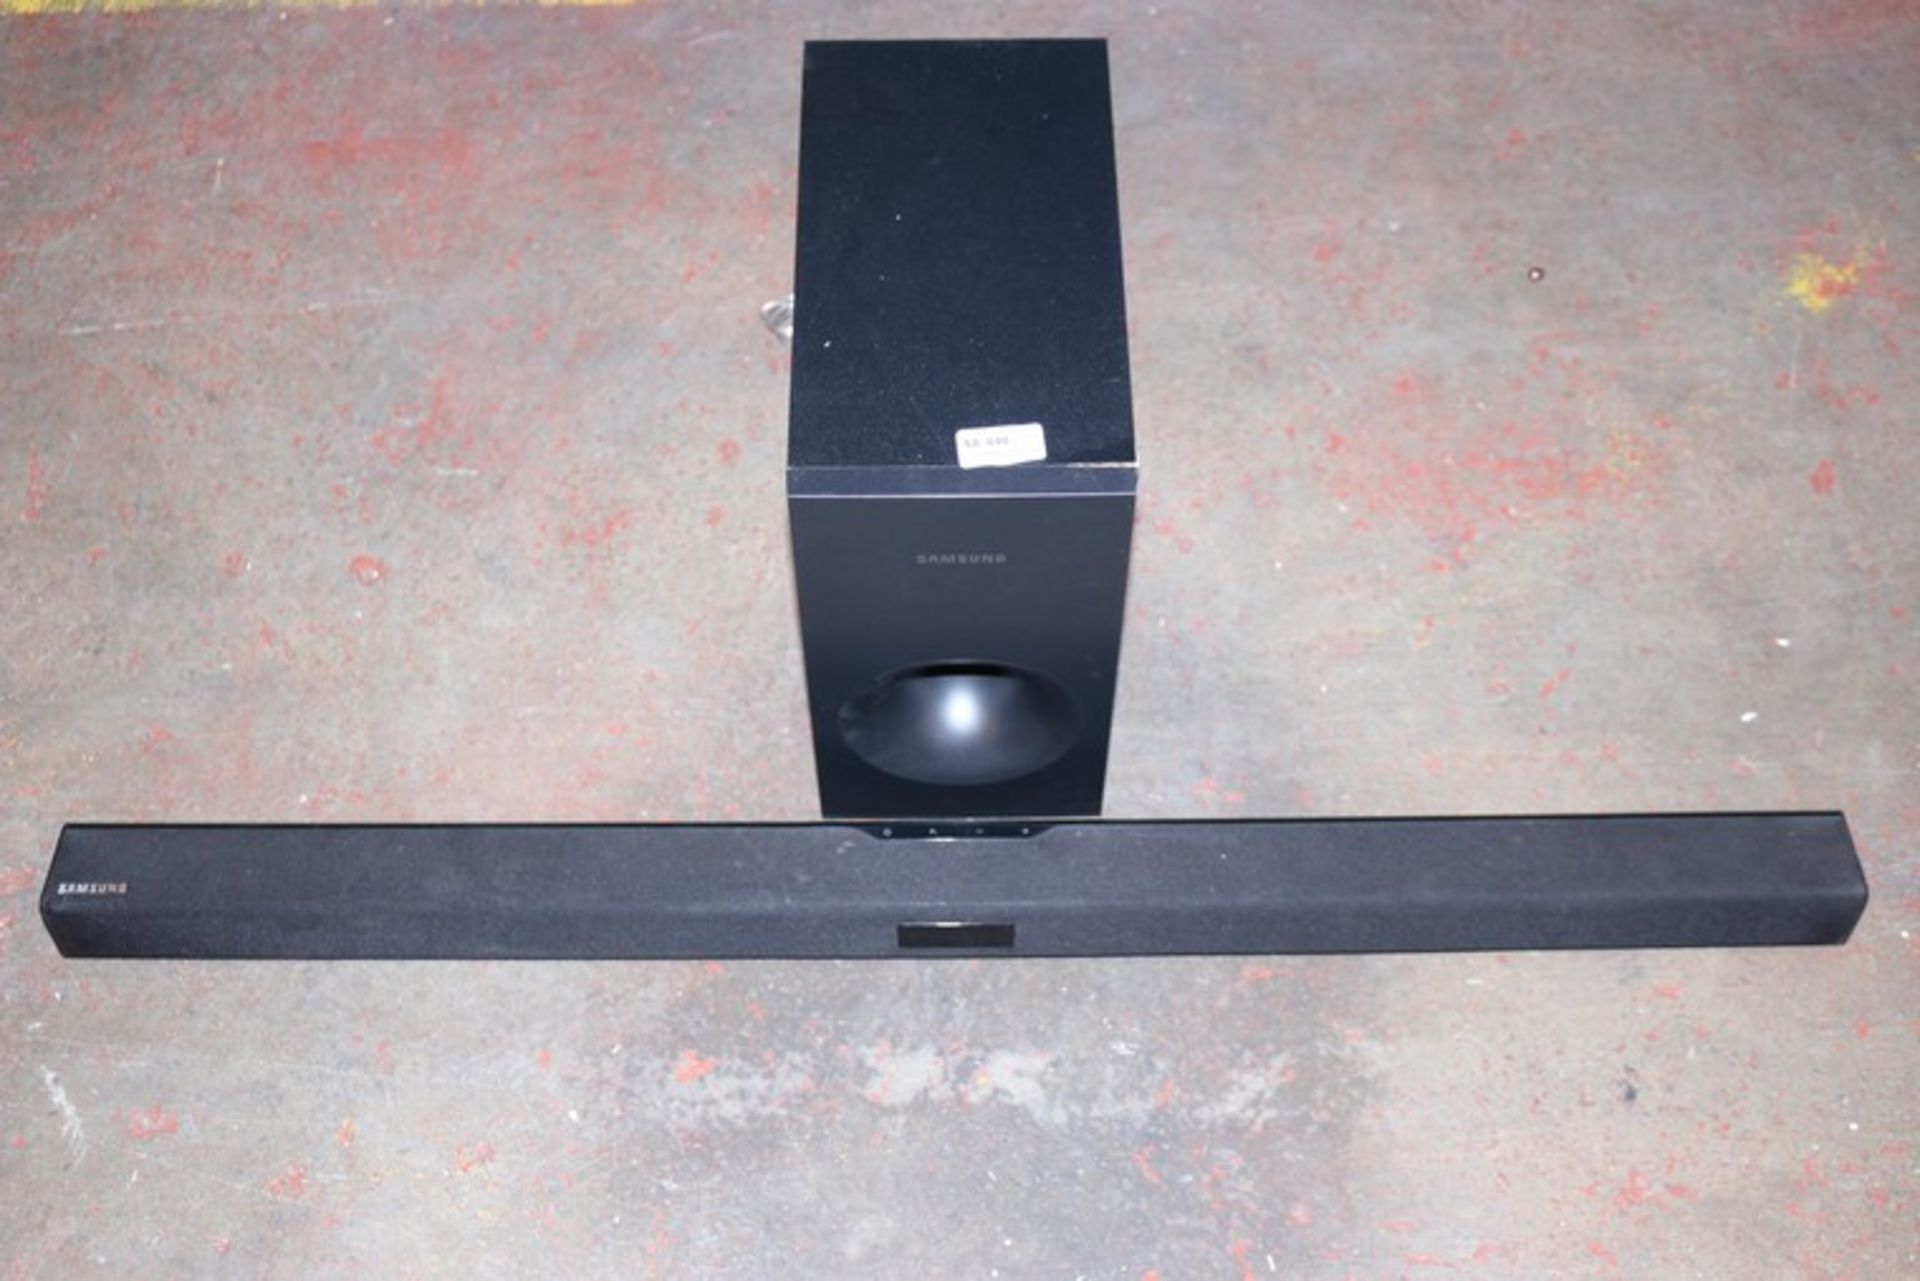 1 x SAMSUNG HWH3-55 SOUND BAR SPEAKER (27.1.17) *PLEASE NOTE THAT THE BID PRICE IS MULTIPLIED BY THE